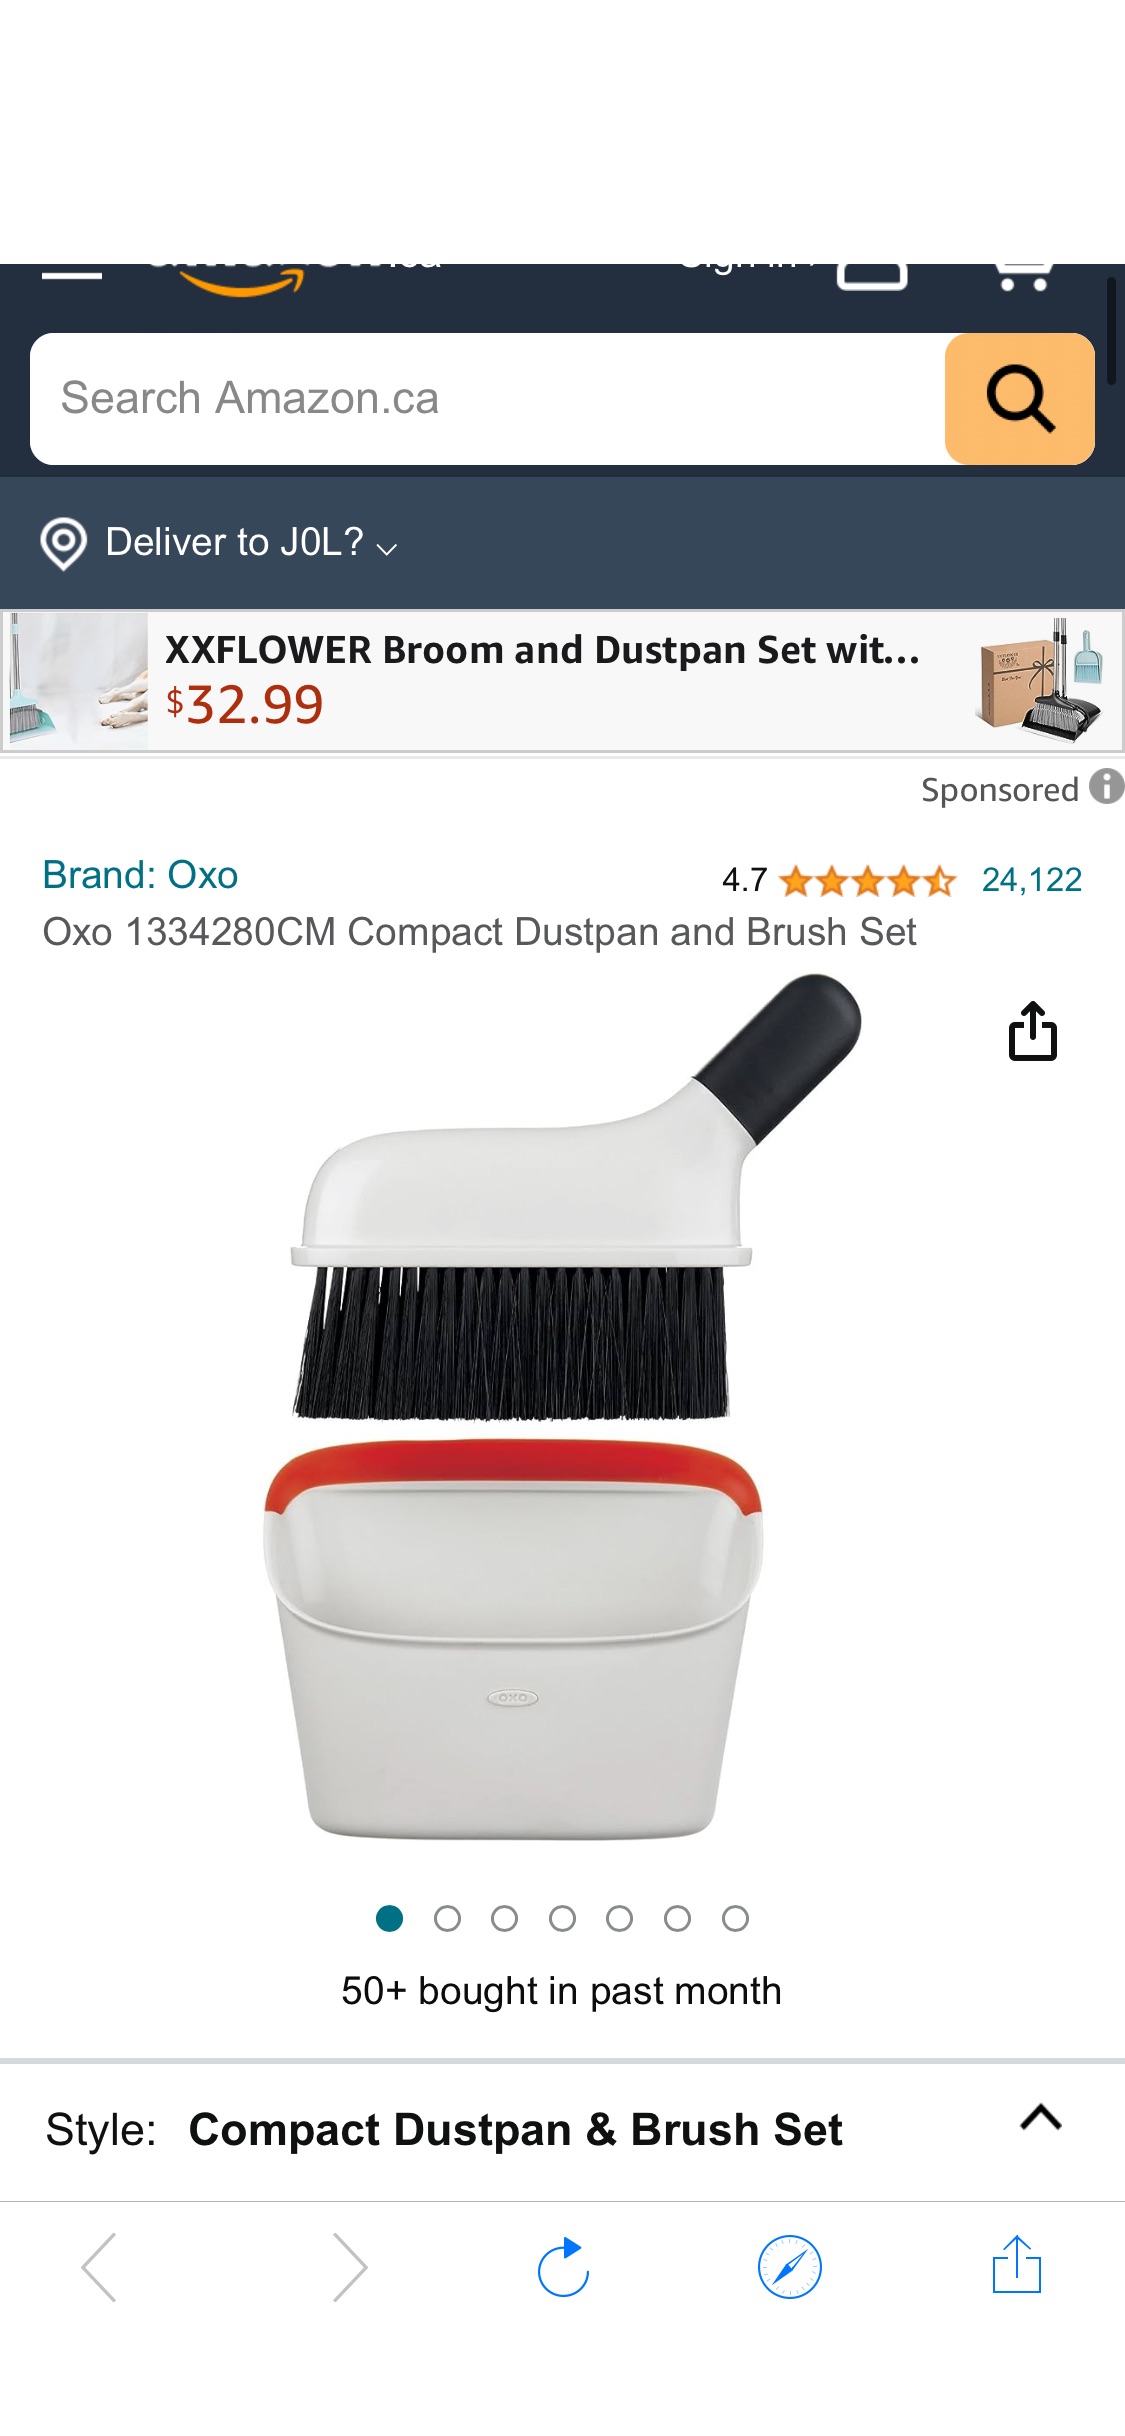 Oxo 1334280CM Compact Dustpan and Brush Set : Amazon.ca: Health & Personal Care